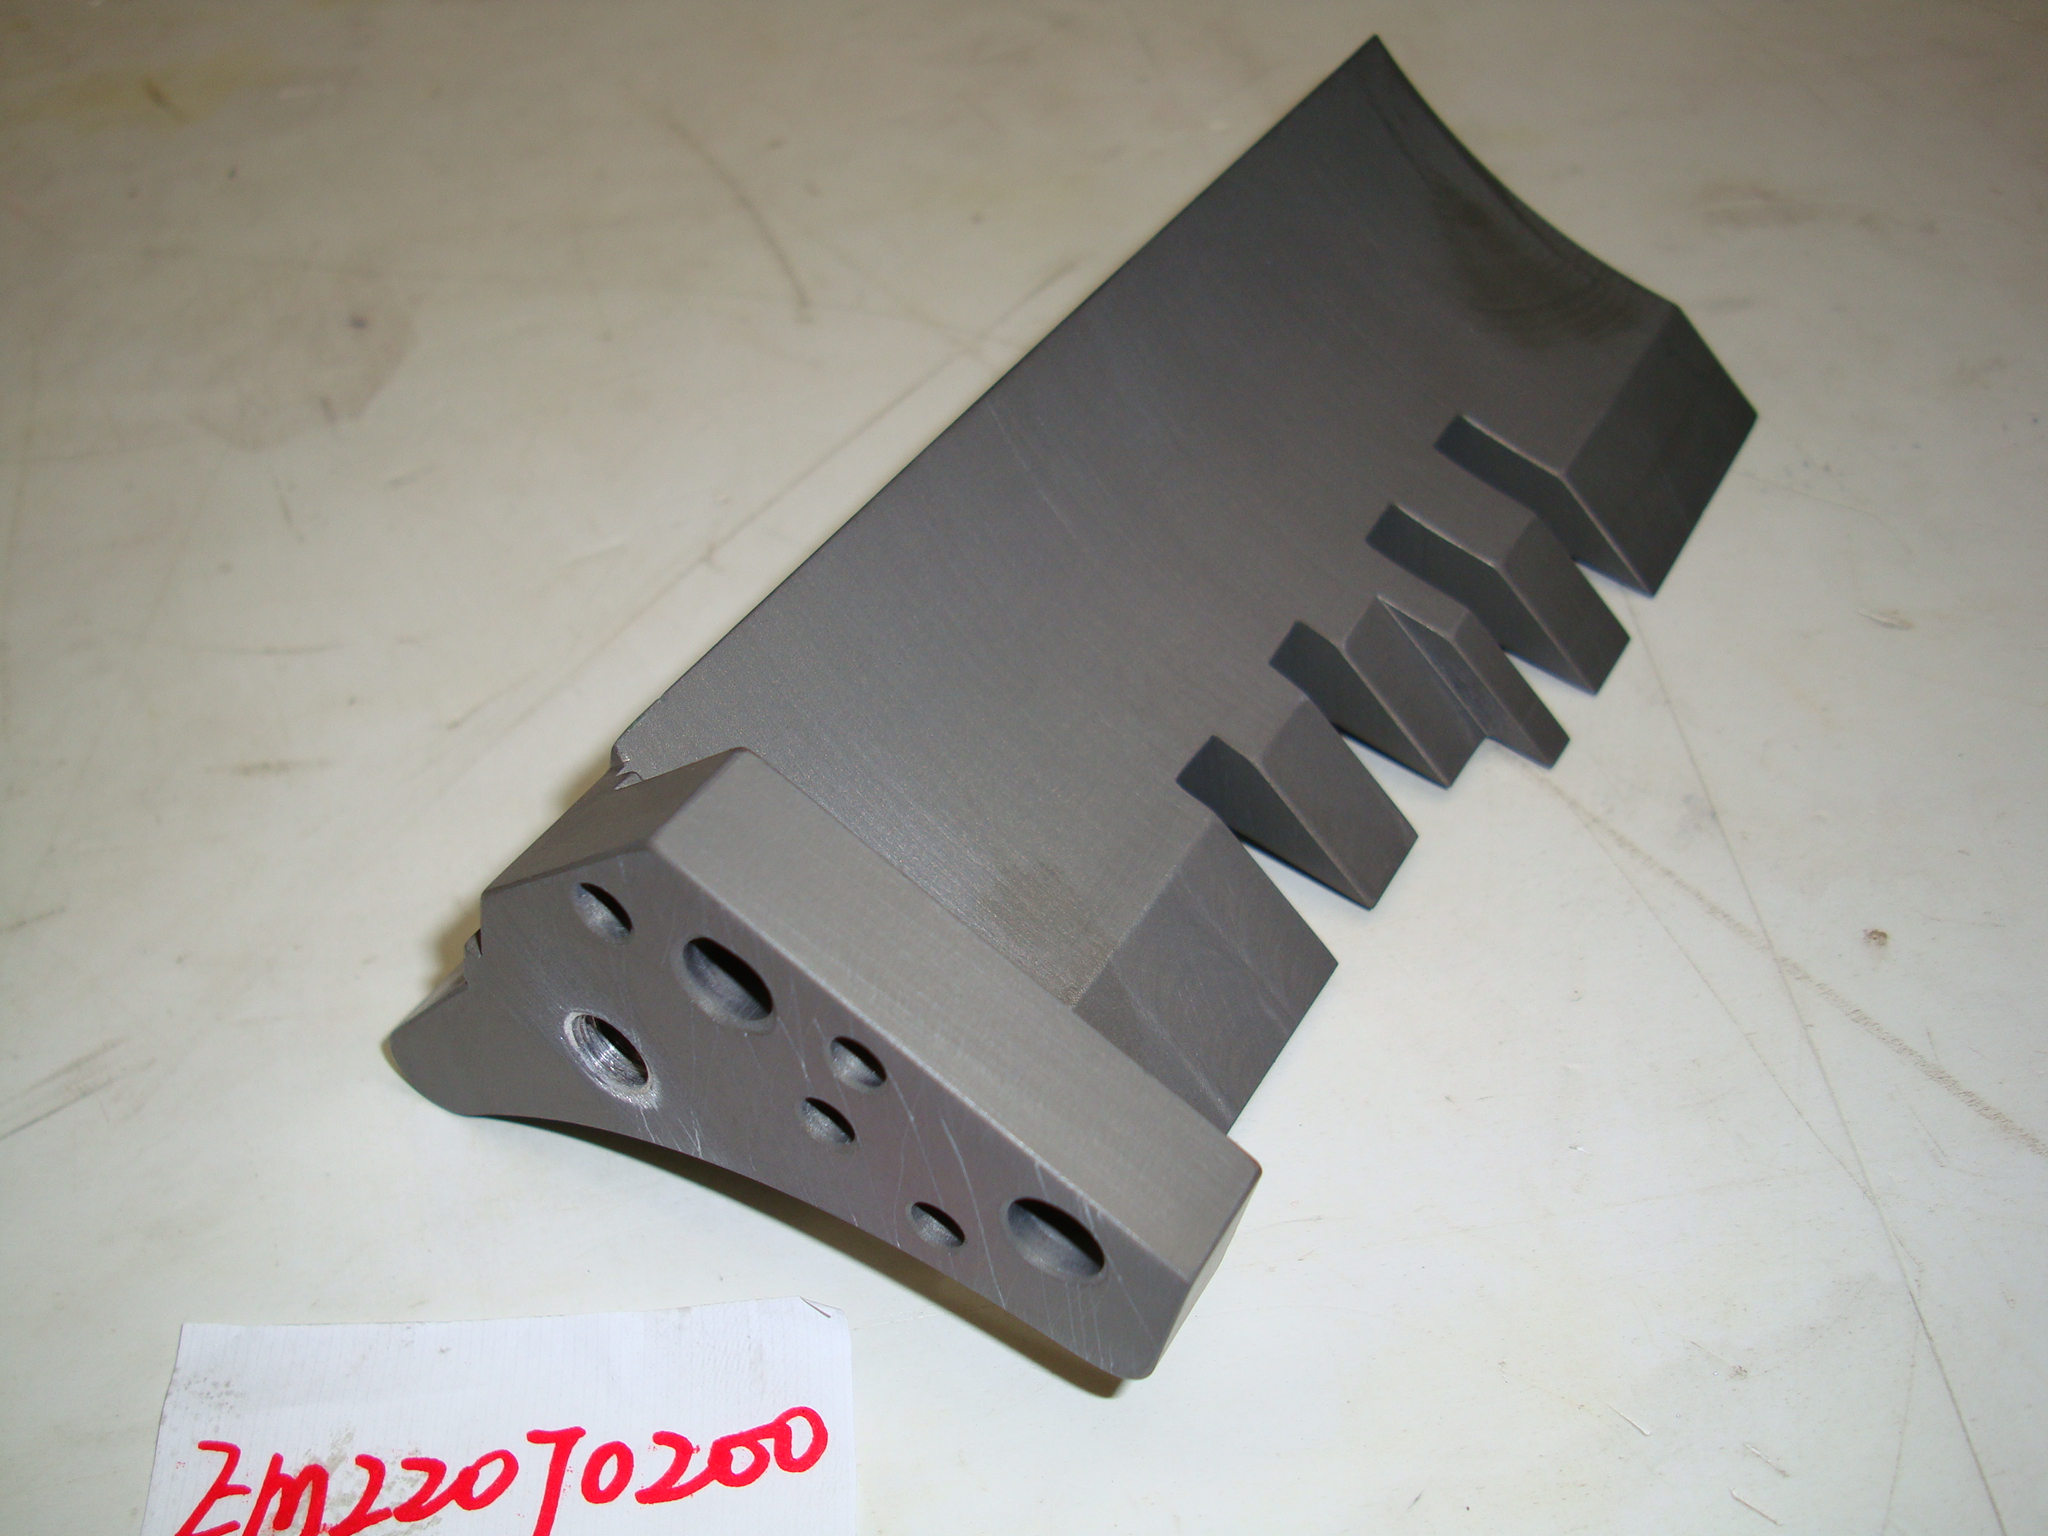 heater plate for protos cigarette making machine